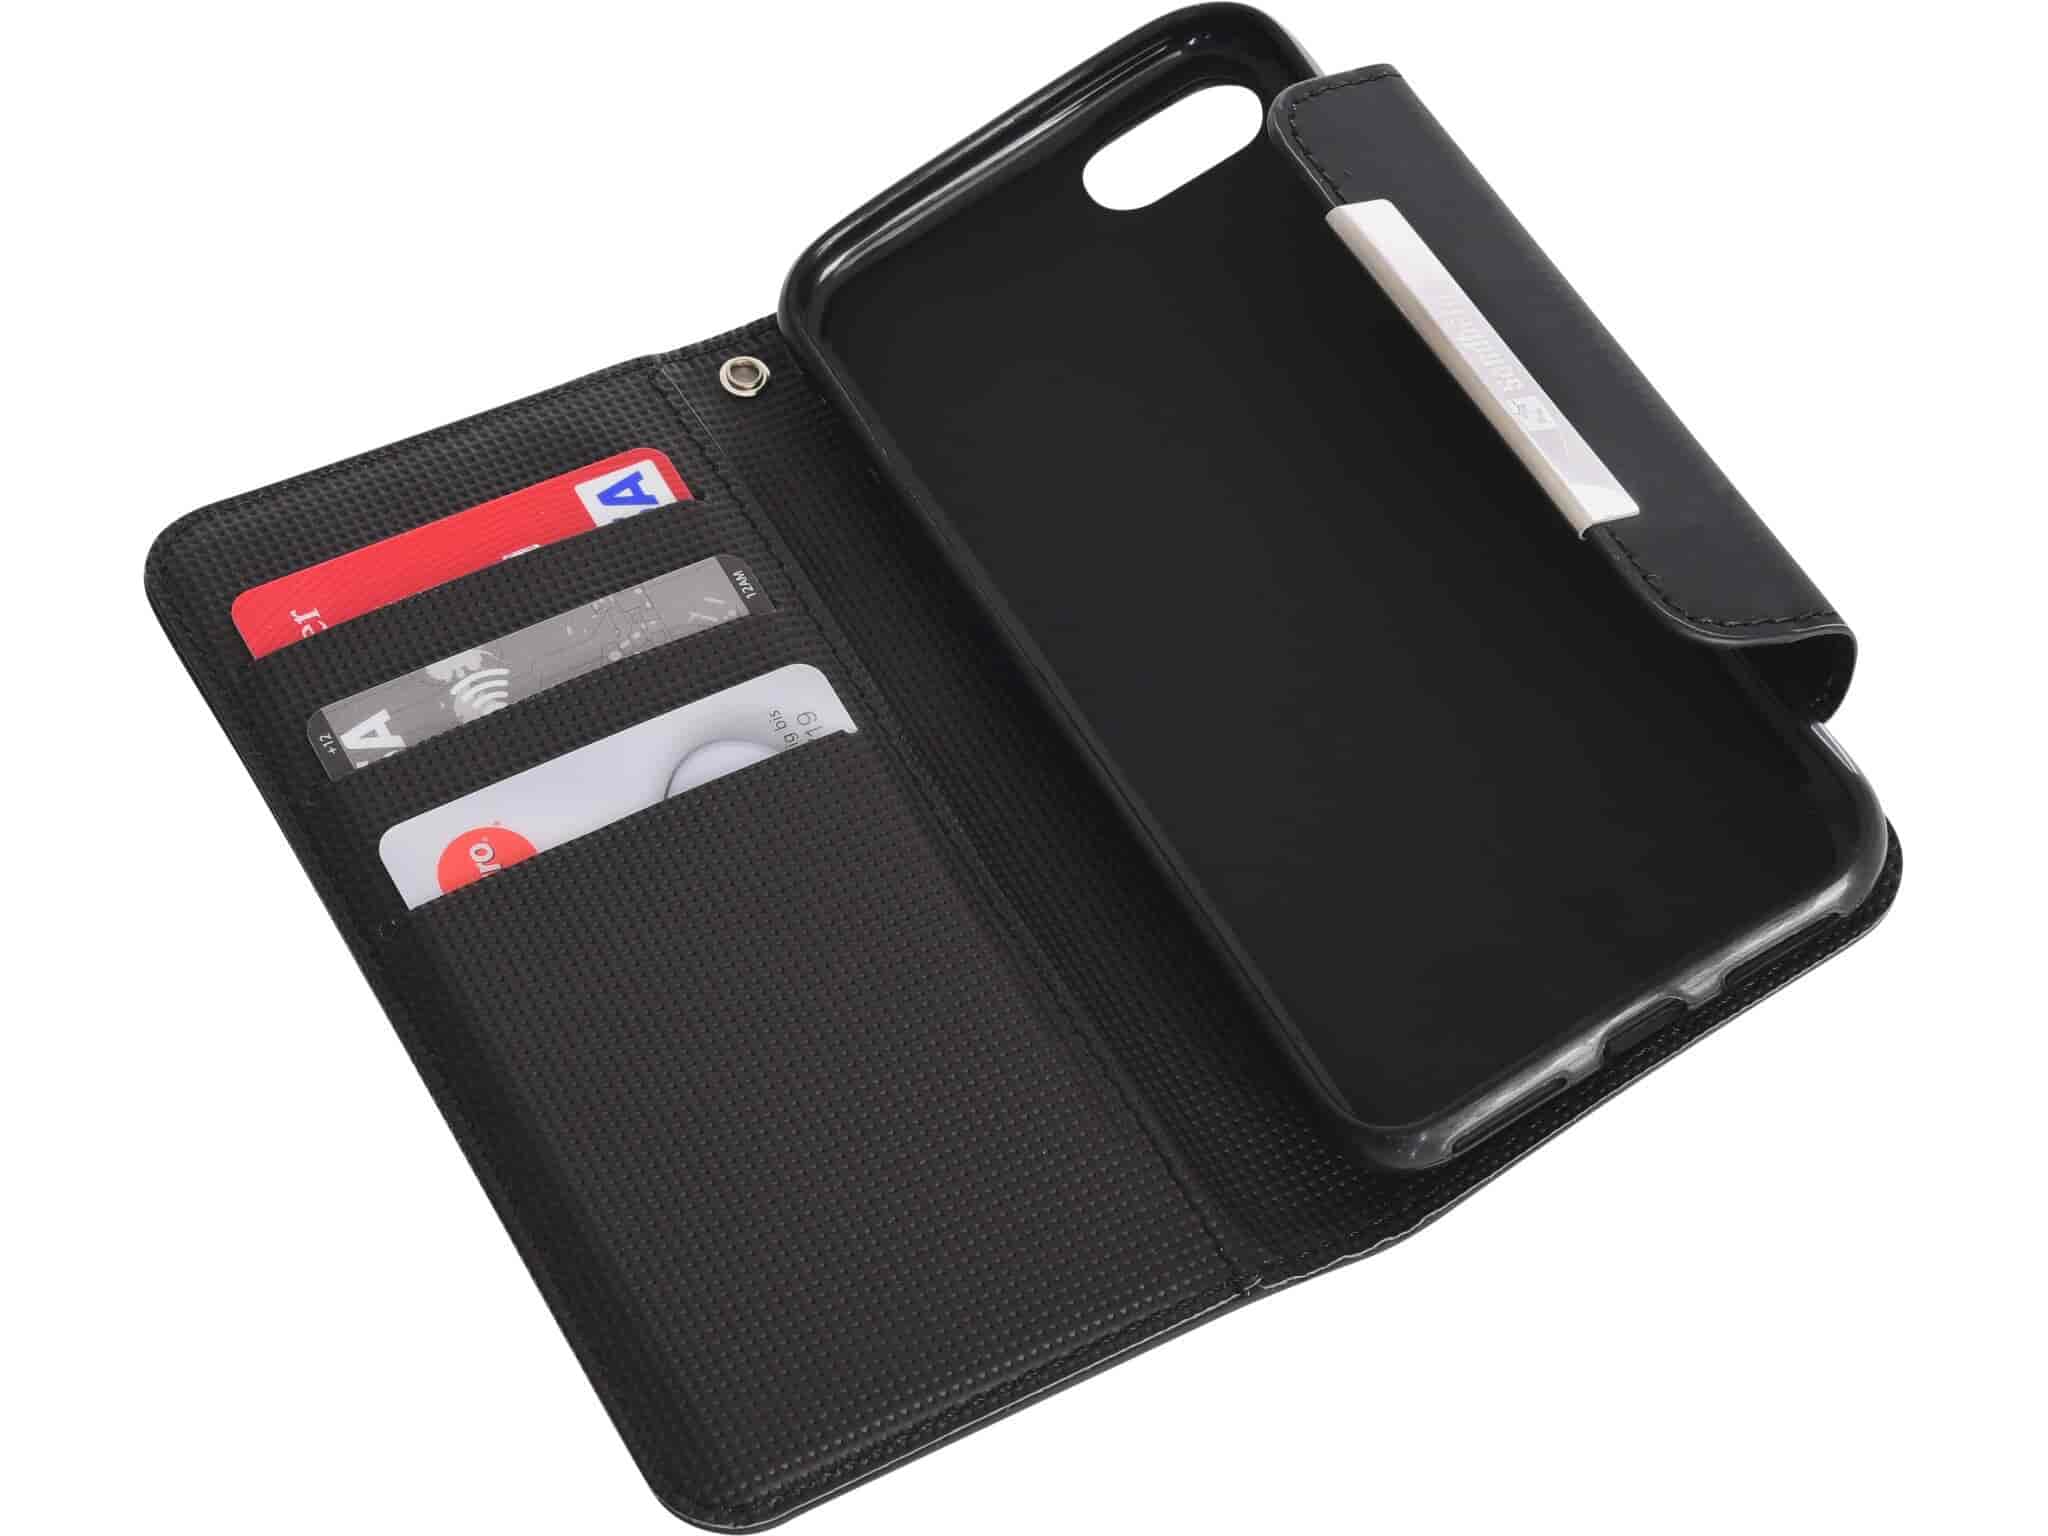 Sandberg Flip wallet iPhone 7/8 BlackskinKeep your phone protected and your credit cards and notes safe in the Sandberg Phone Wallet. All you need, well organized and always at hand.Sandberg